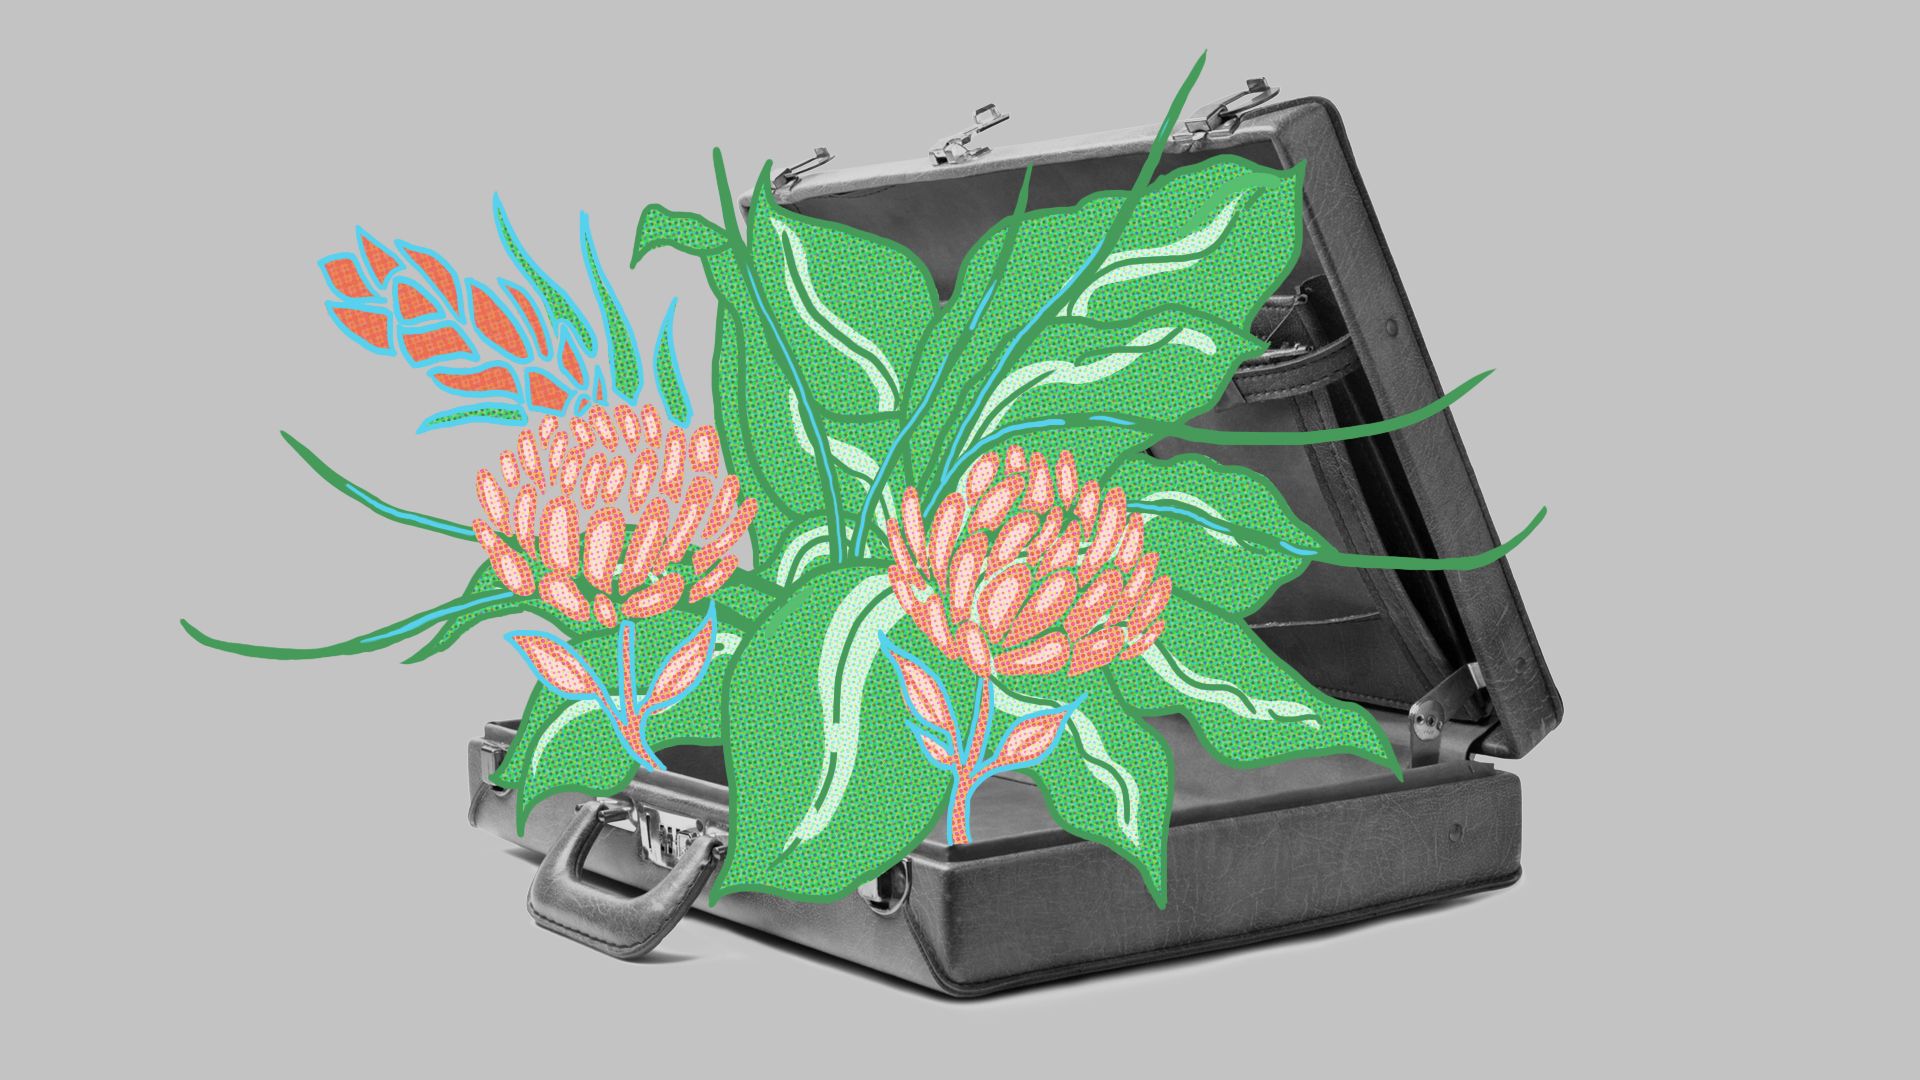 A briefcase bursting with plants